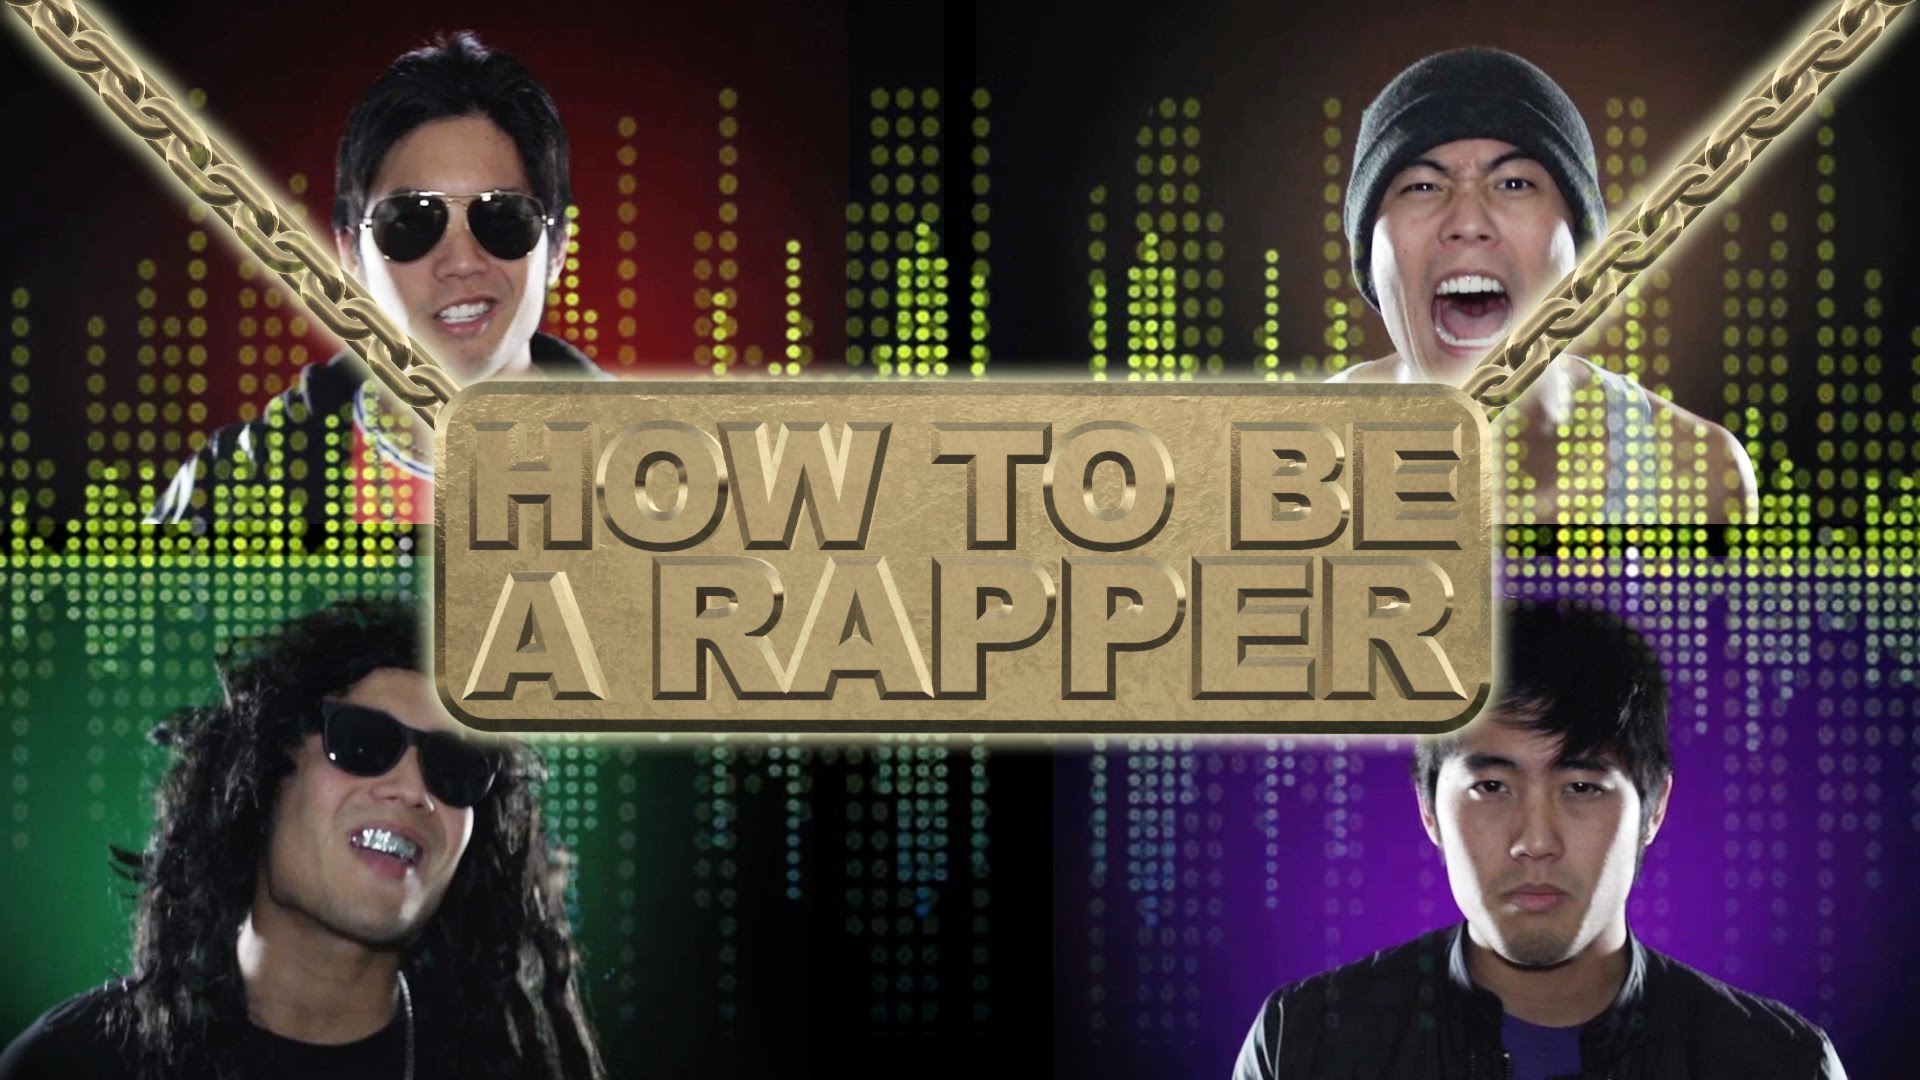 WTH: How to Be A Rapper